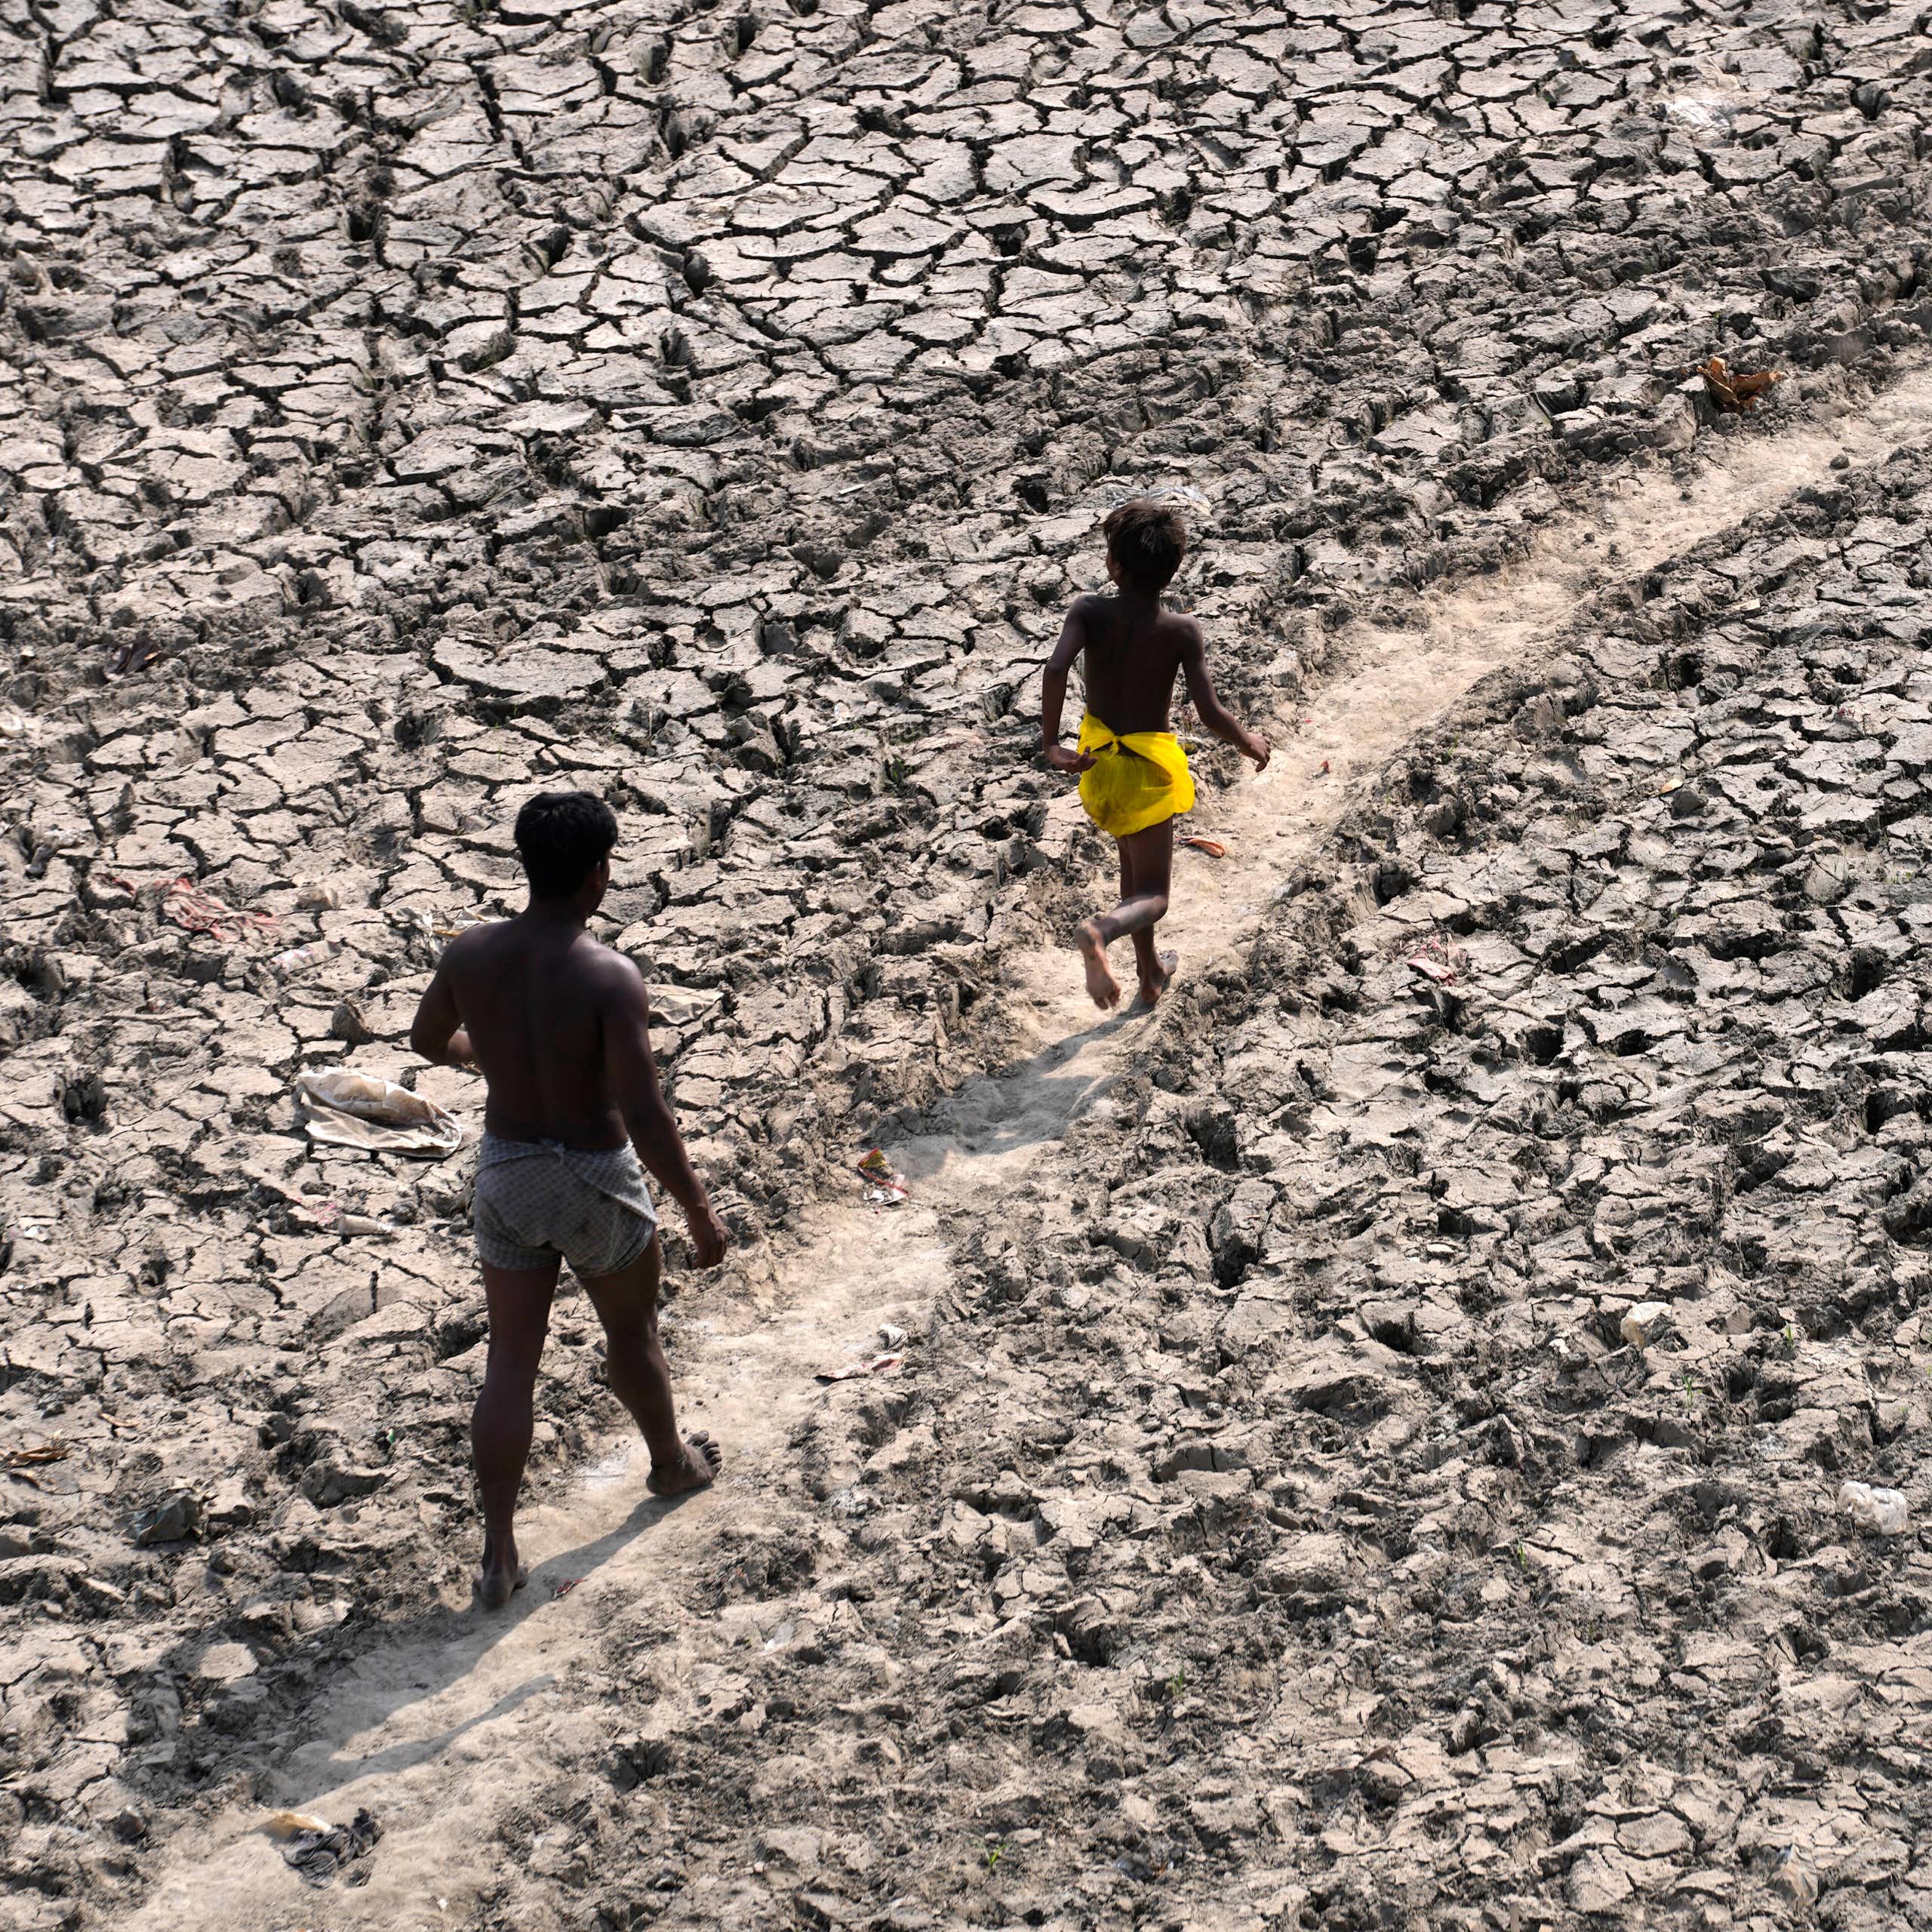 A man and a boy walk along a dried river bed.